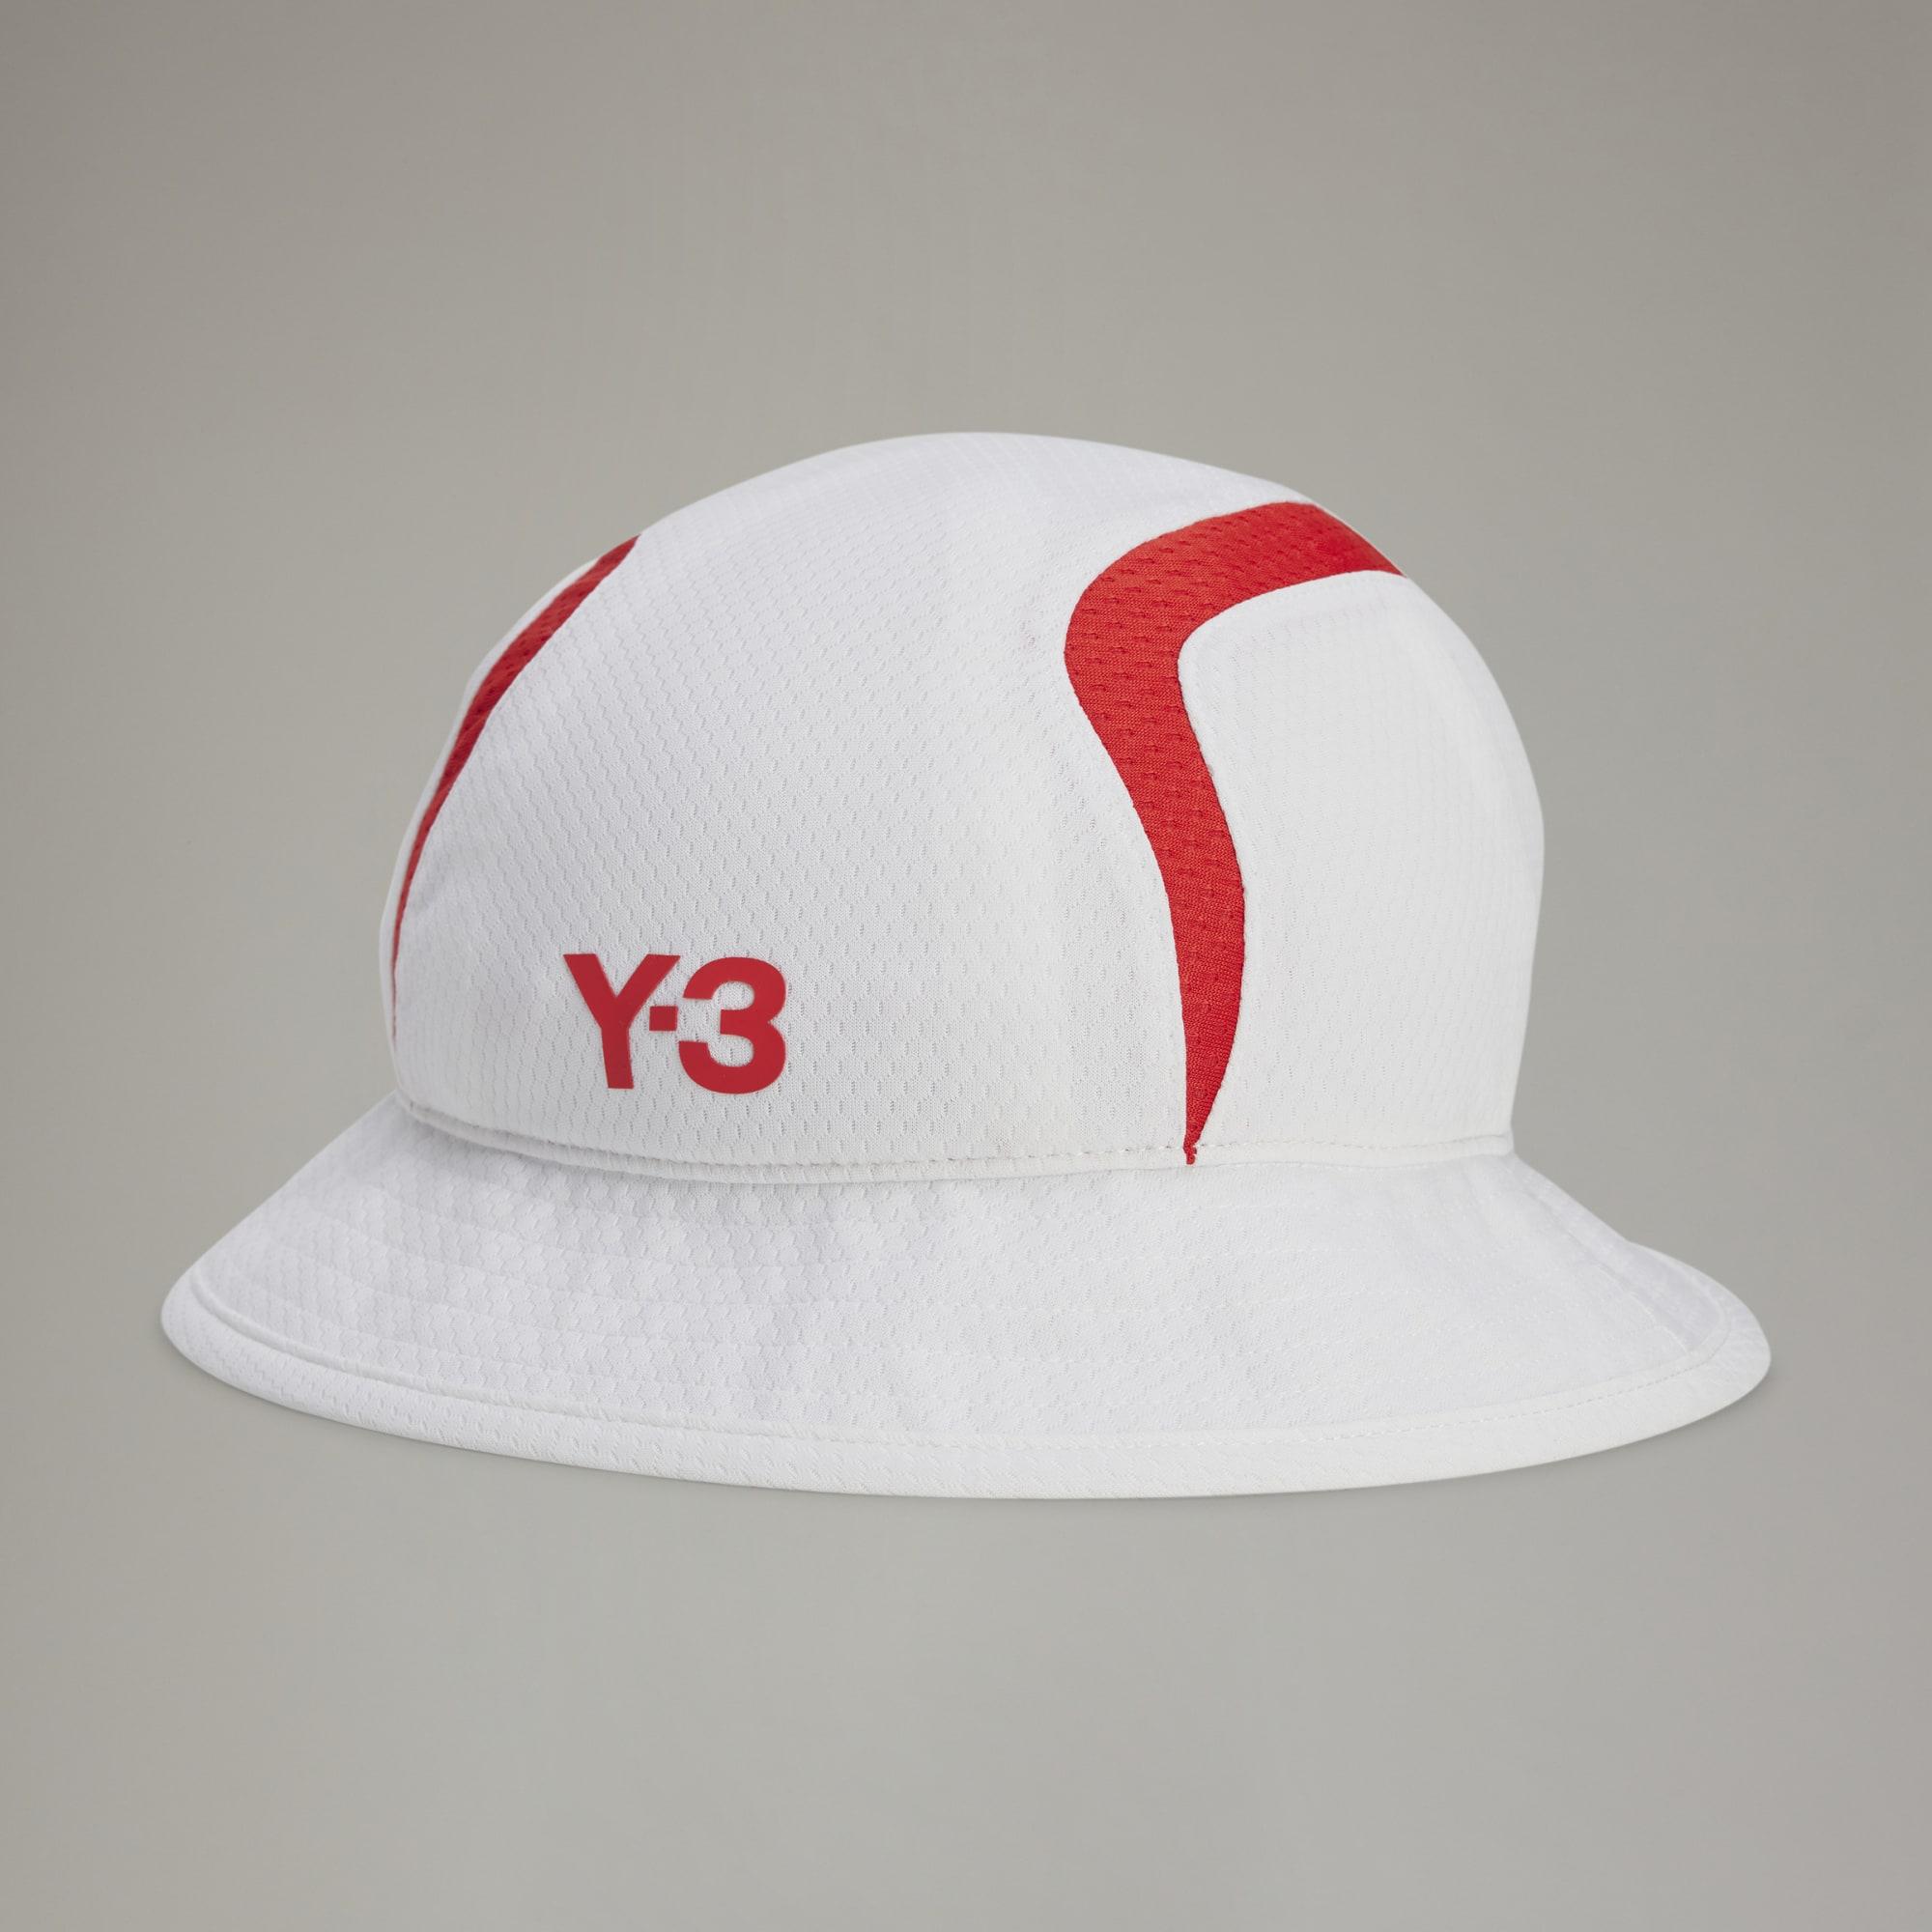 adidas Y-3 Palace Bucket Hat in White | Lyst UK